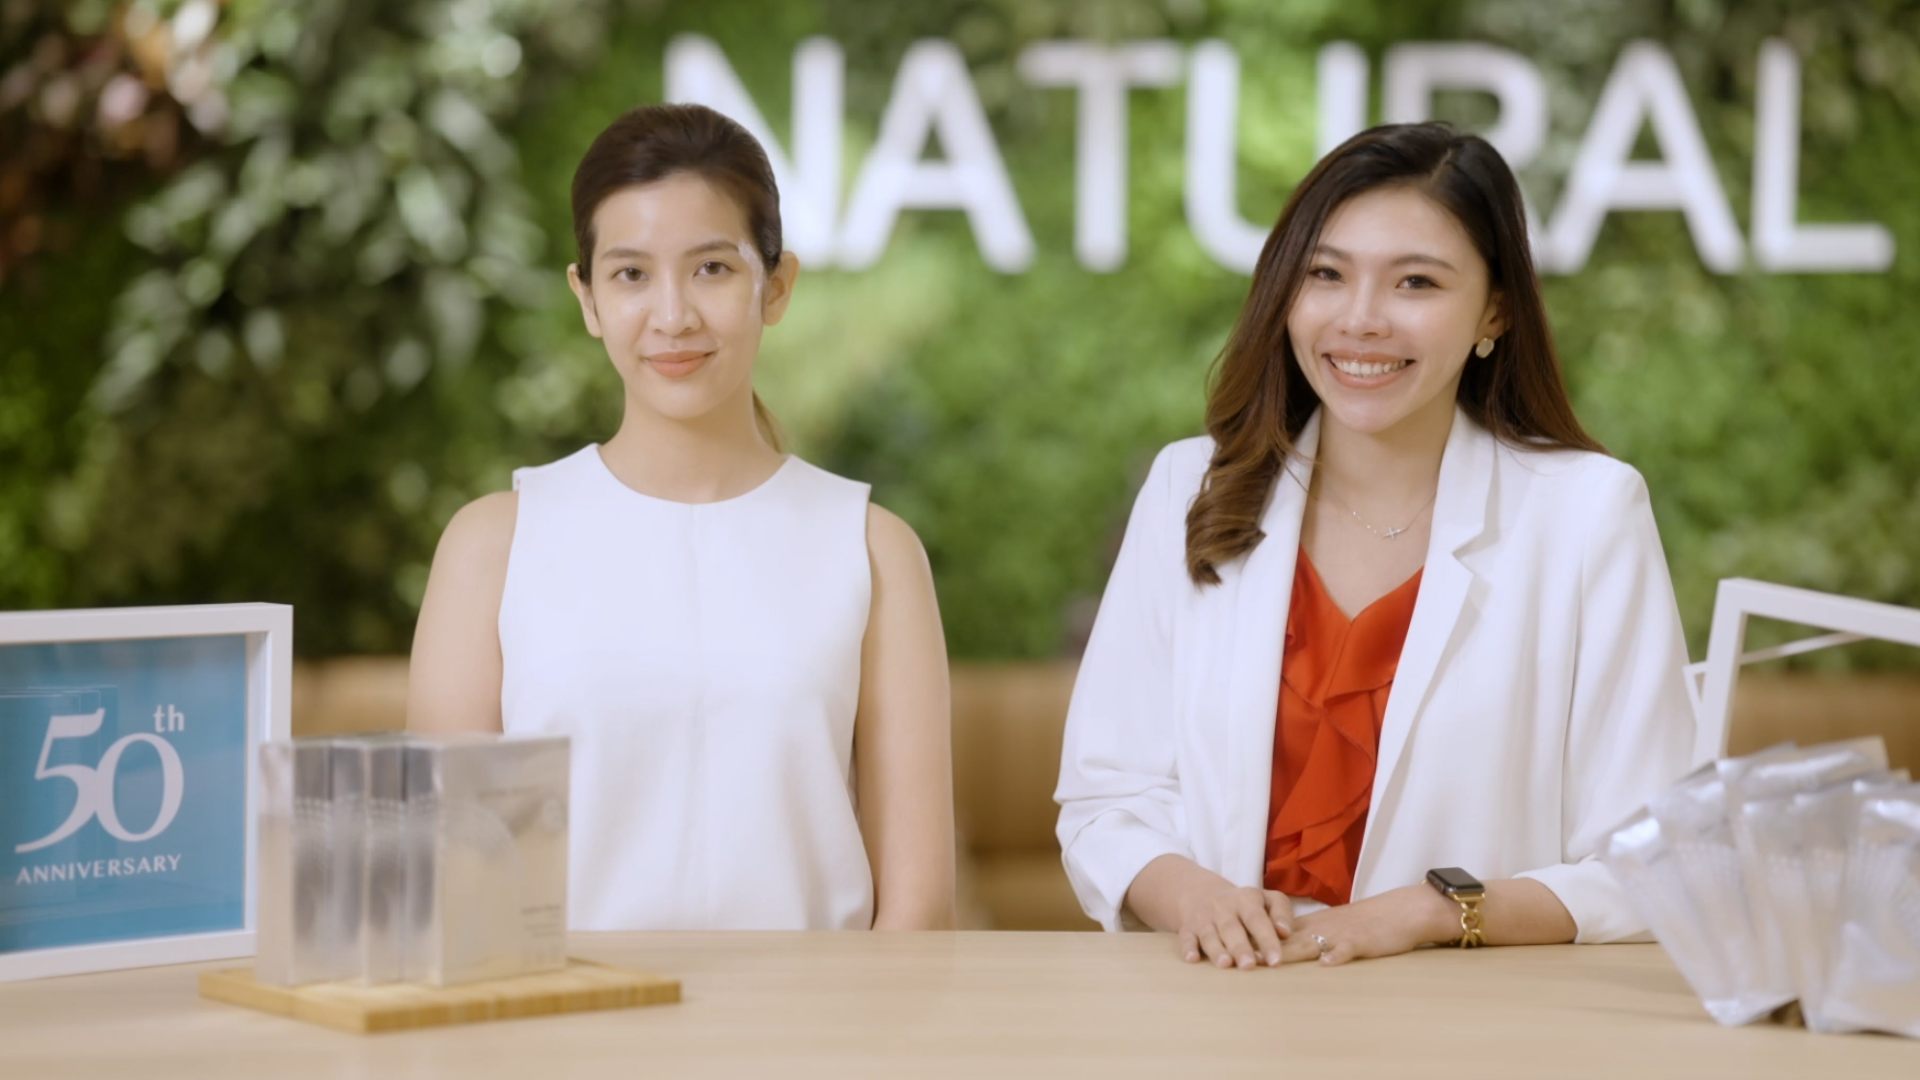 The Beauty-Seeking Opportunities: Taiwan Excellence Delivers Excellent Solutions to Perfect Skincare in Asia